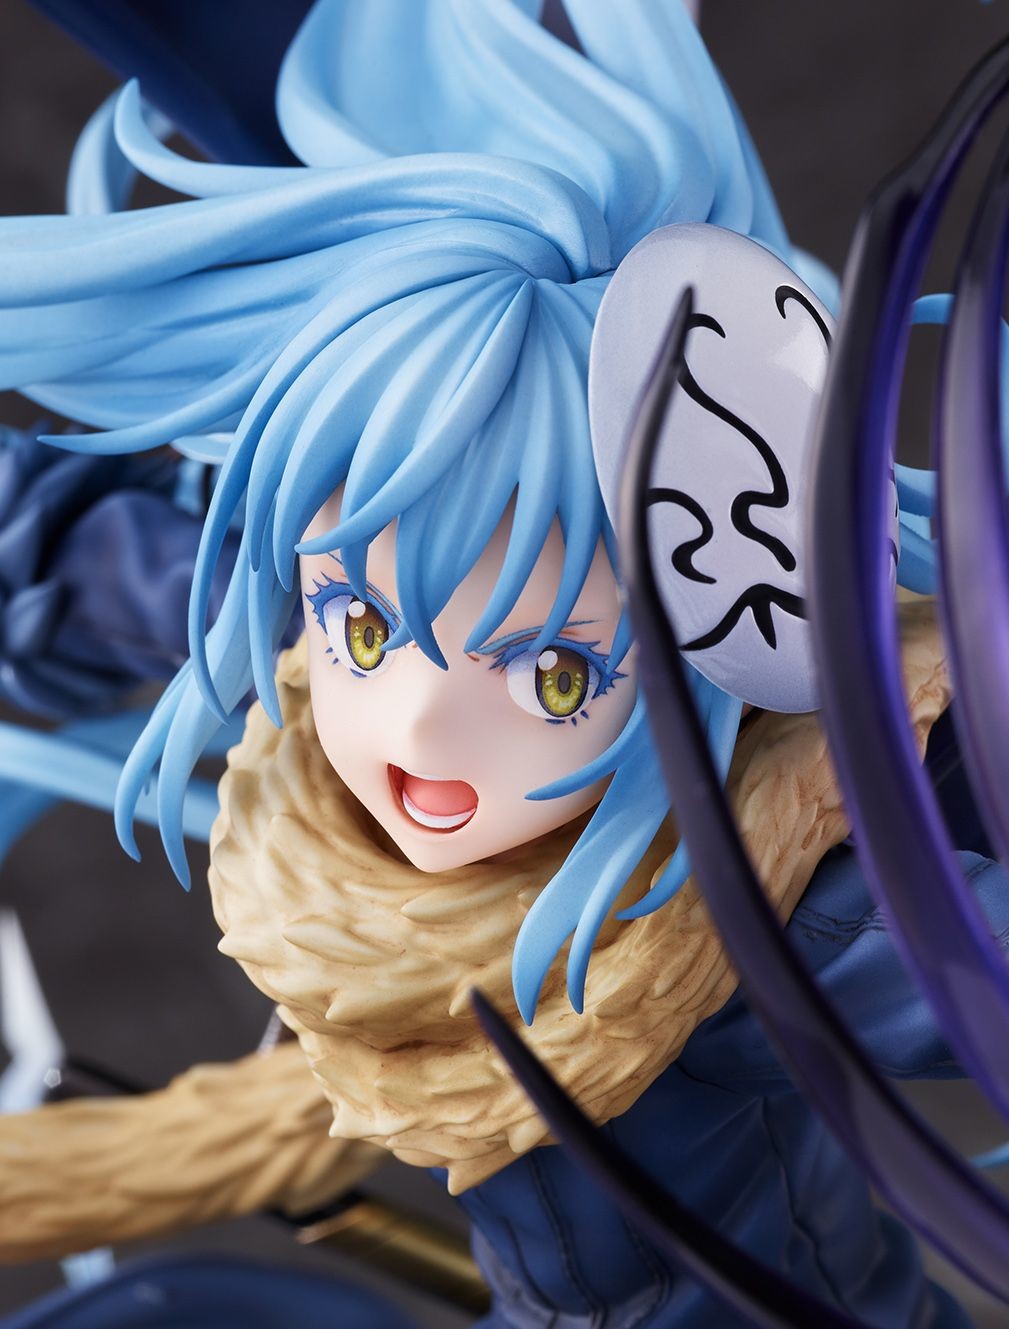 That Time I Got Reincarnated As A Slime - Rimuru Tempest - Shibuya Scramble Figure - 1/7 - Ultimate Ver. (Alpha Satellite) [Shop Exclusive], Franchise: That Time I Got Reincarnated As A Slime, Brand: Alpha Satellite, Release Date: 16. Apr 2022, Store Name: Nippon Figures